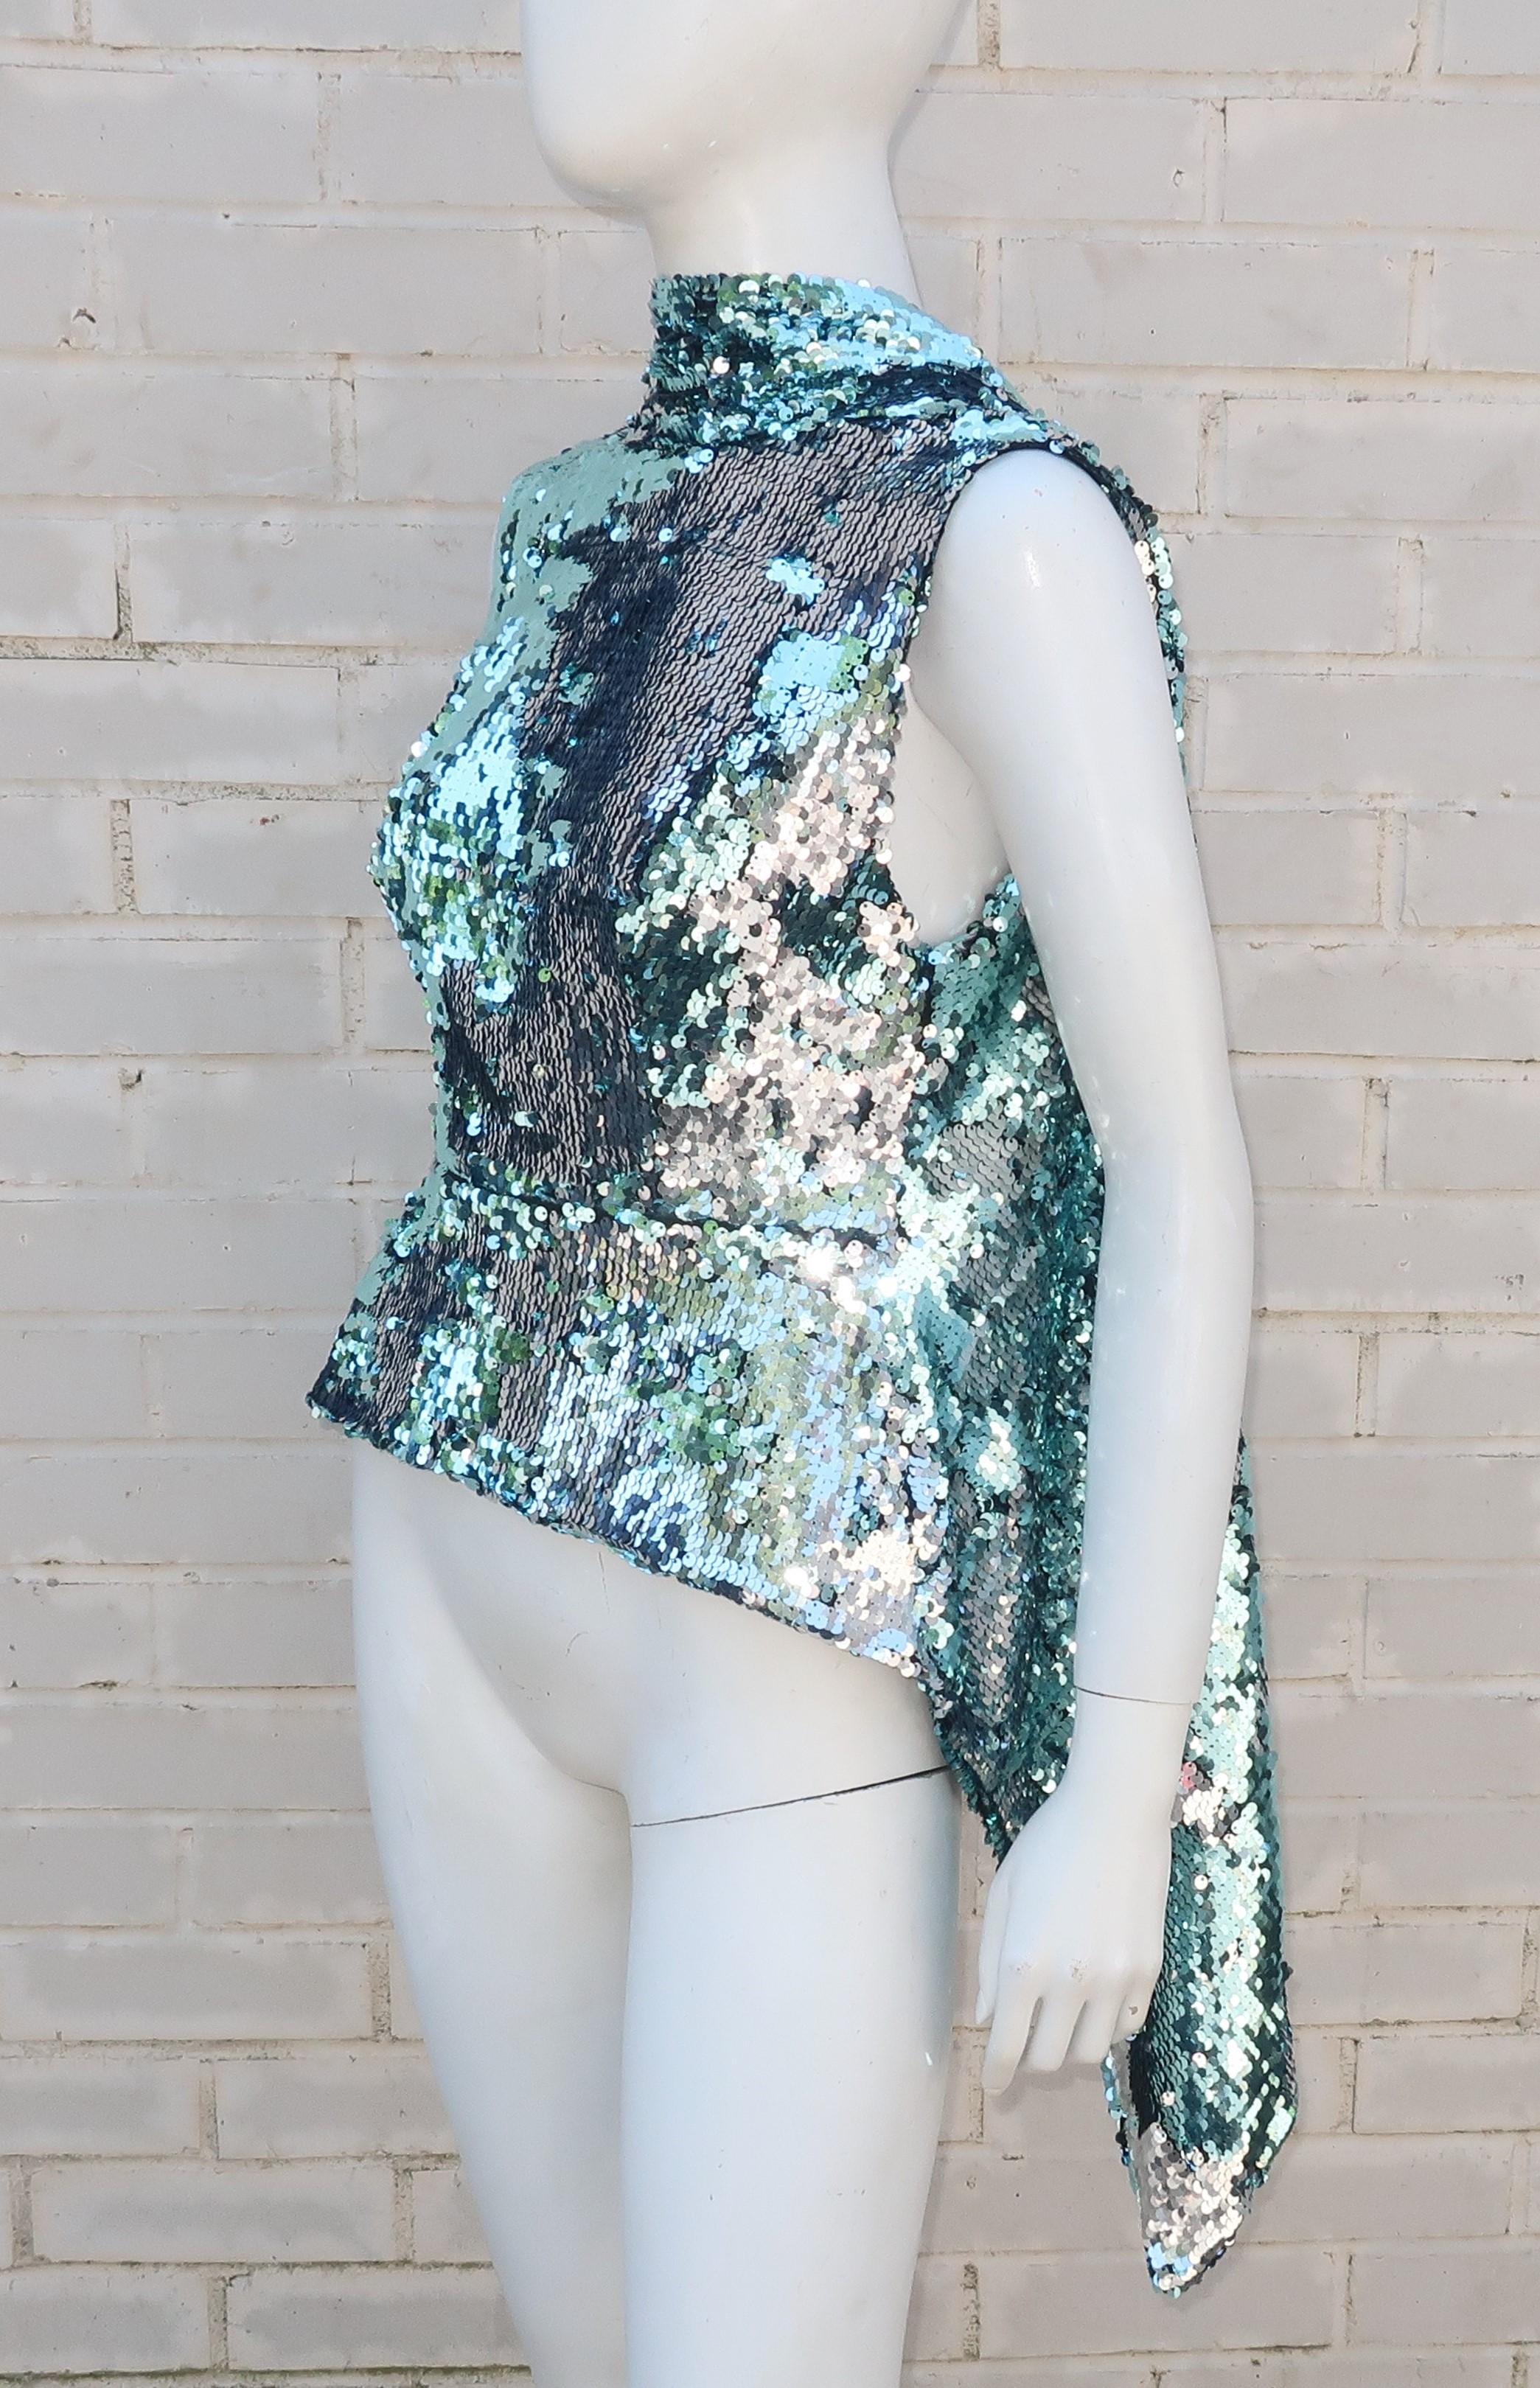 Inspired by disco days and Studio 54 looks, Michael Halpern's label creates glamorous garments including this dramatic sequin top.  The expertly cut silhouette effortless drops from the mock turtleneck to a built-in yoke with a drape down the back